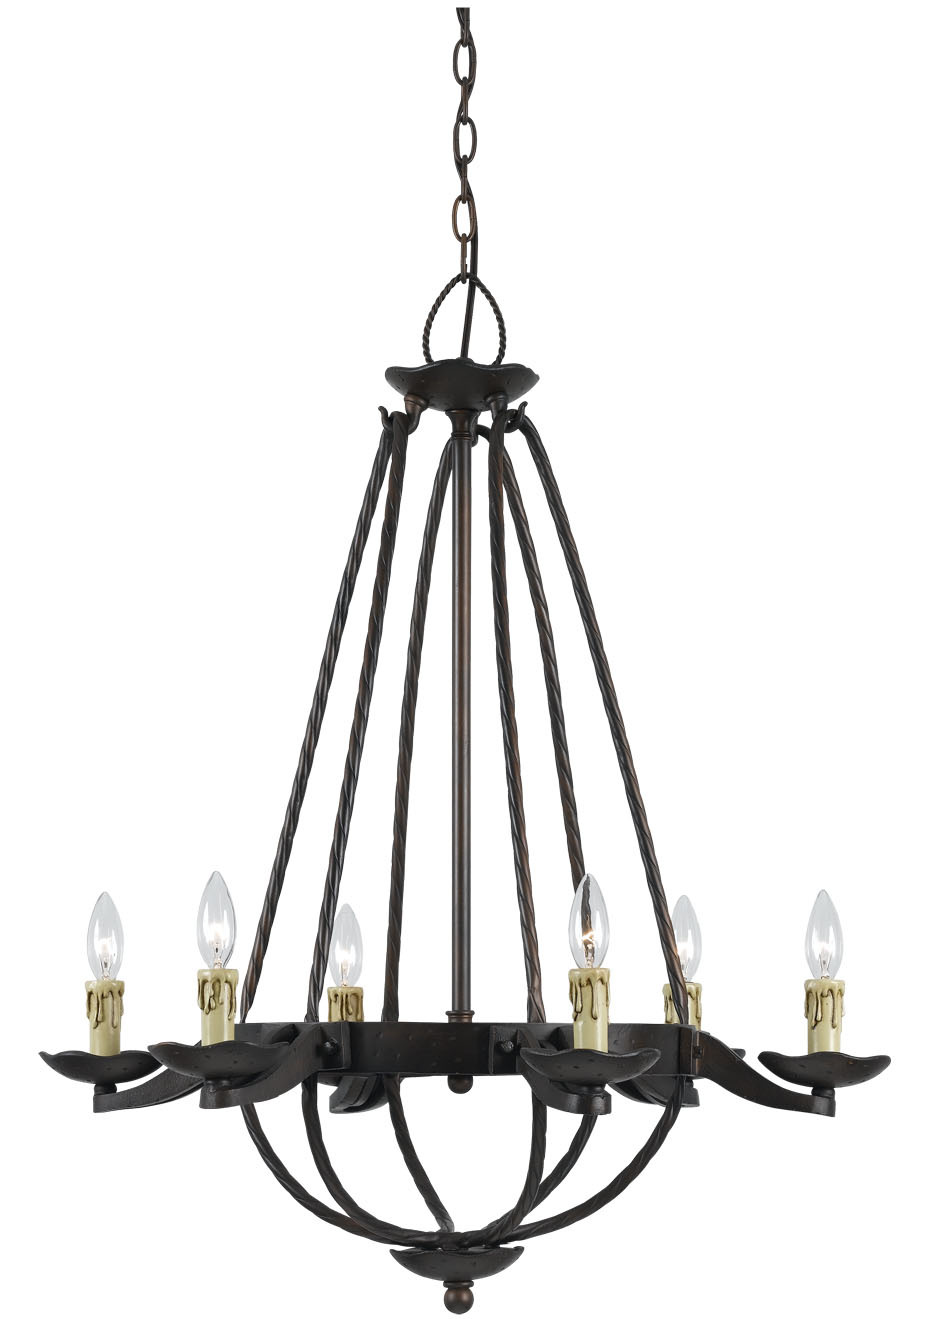 60W X 6 MOJAVE HAND FORGED IRON 6 LIGHT CHANDELIER